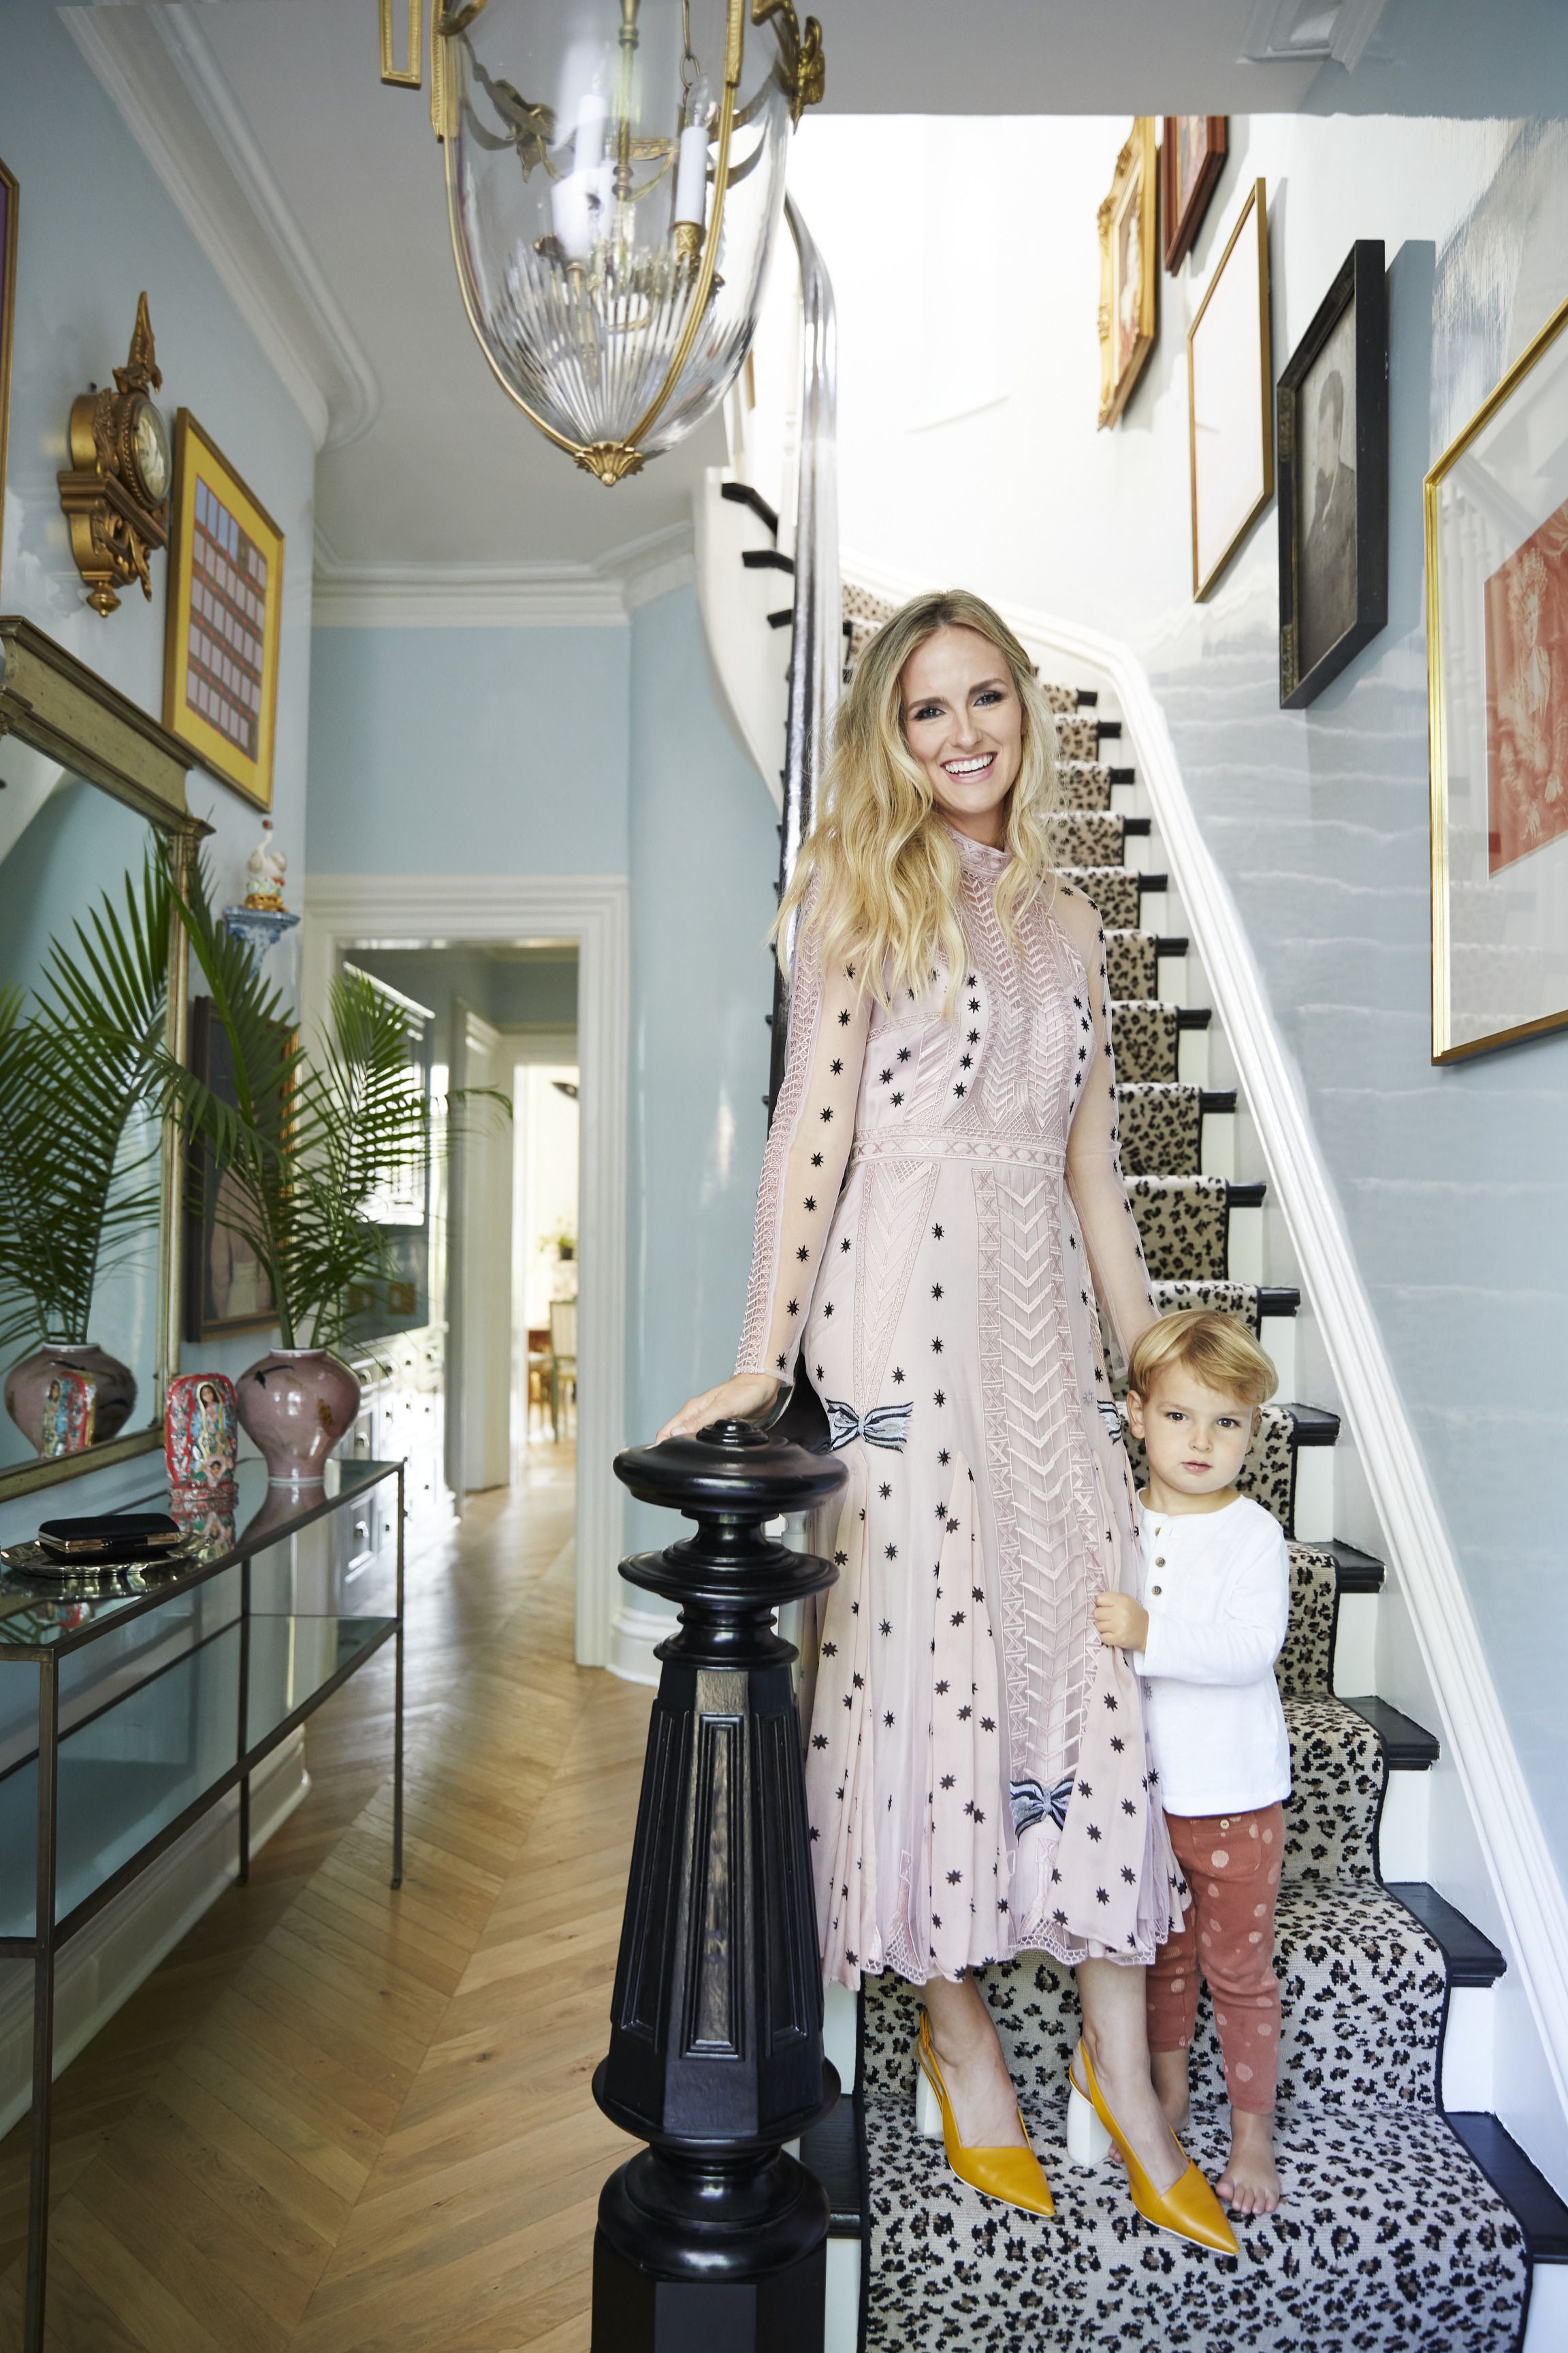 Sommer and her son greet guests on a stairwell lined with a panther pattern rug